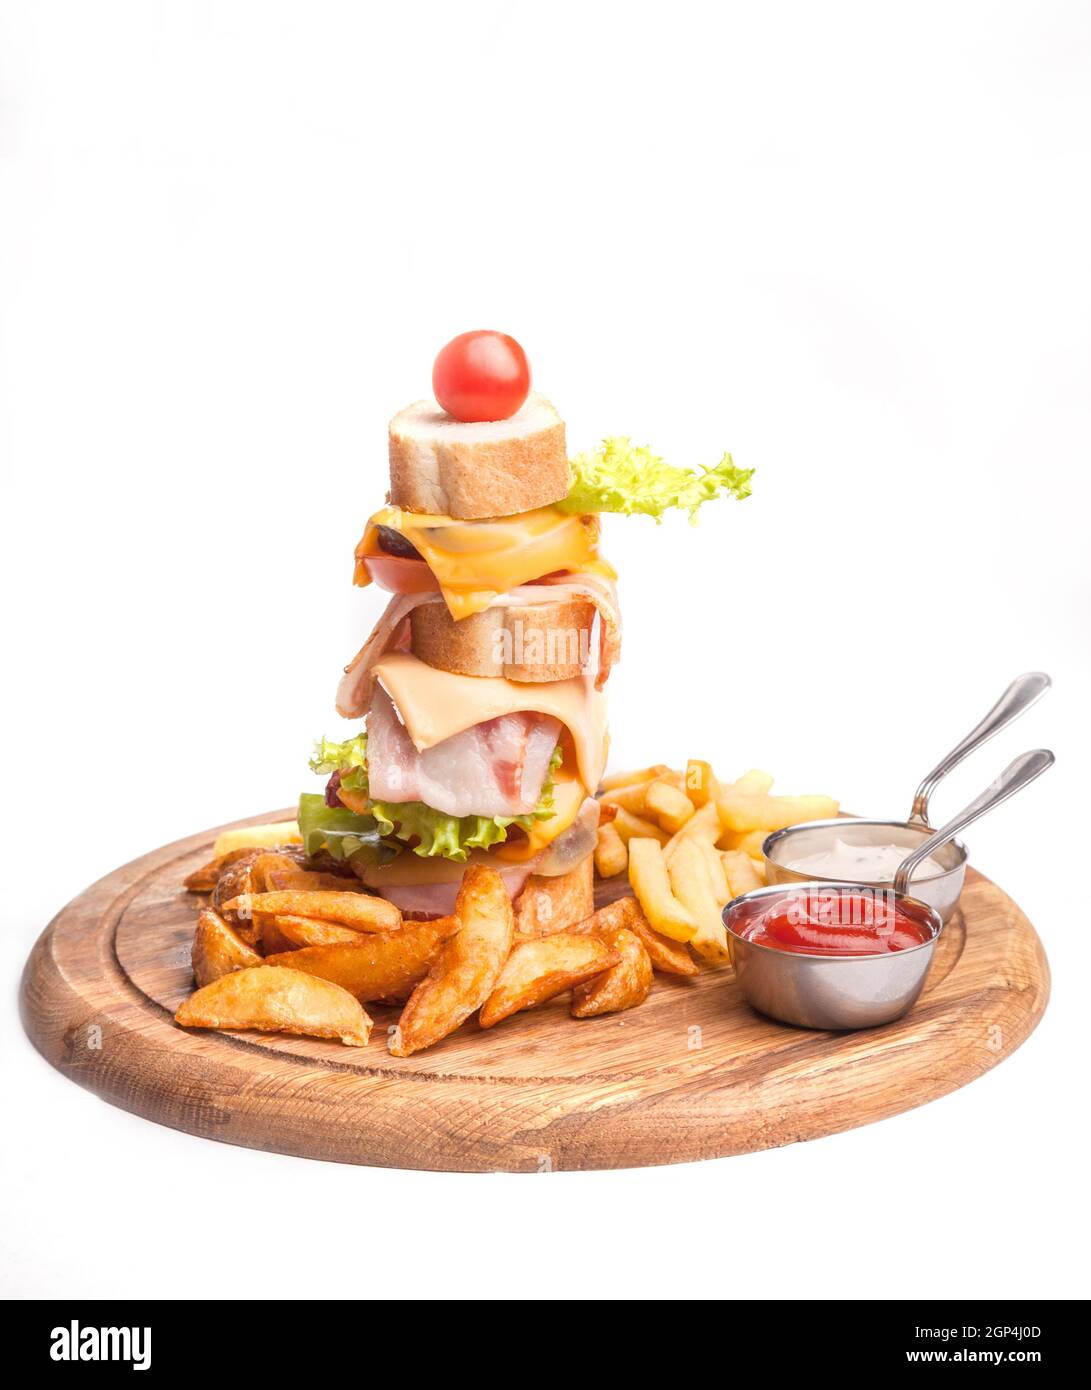 fast food set of big hamburger and fries on a light background. Food is unhealthy. Hamburger on a white background. Close-up. Stock Photo